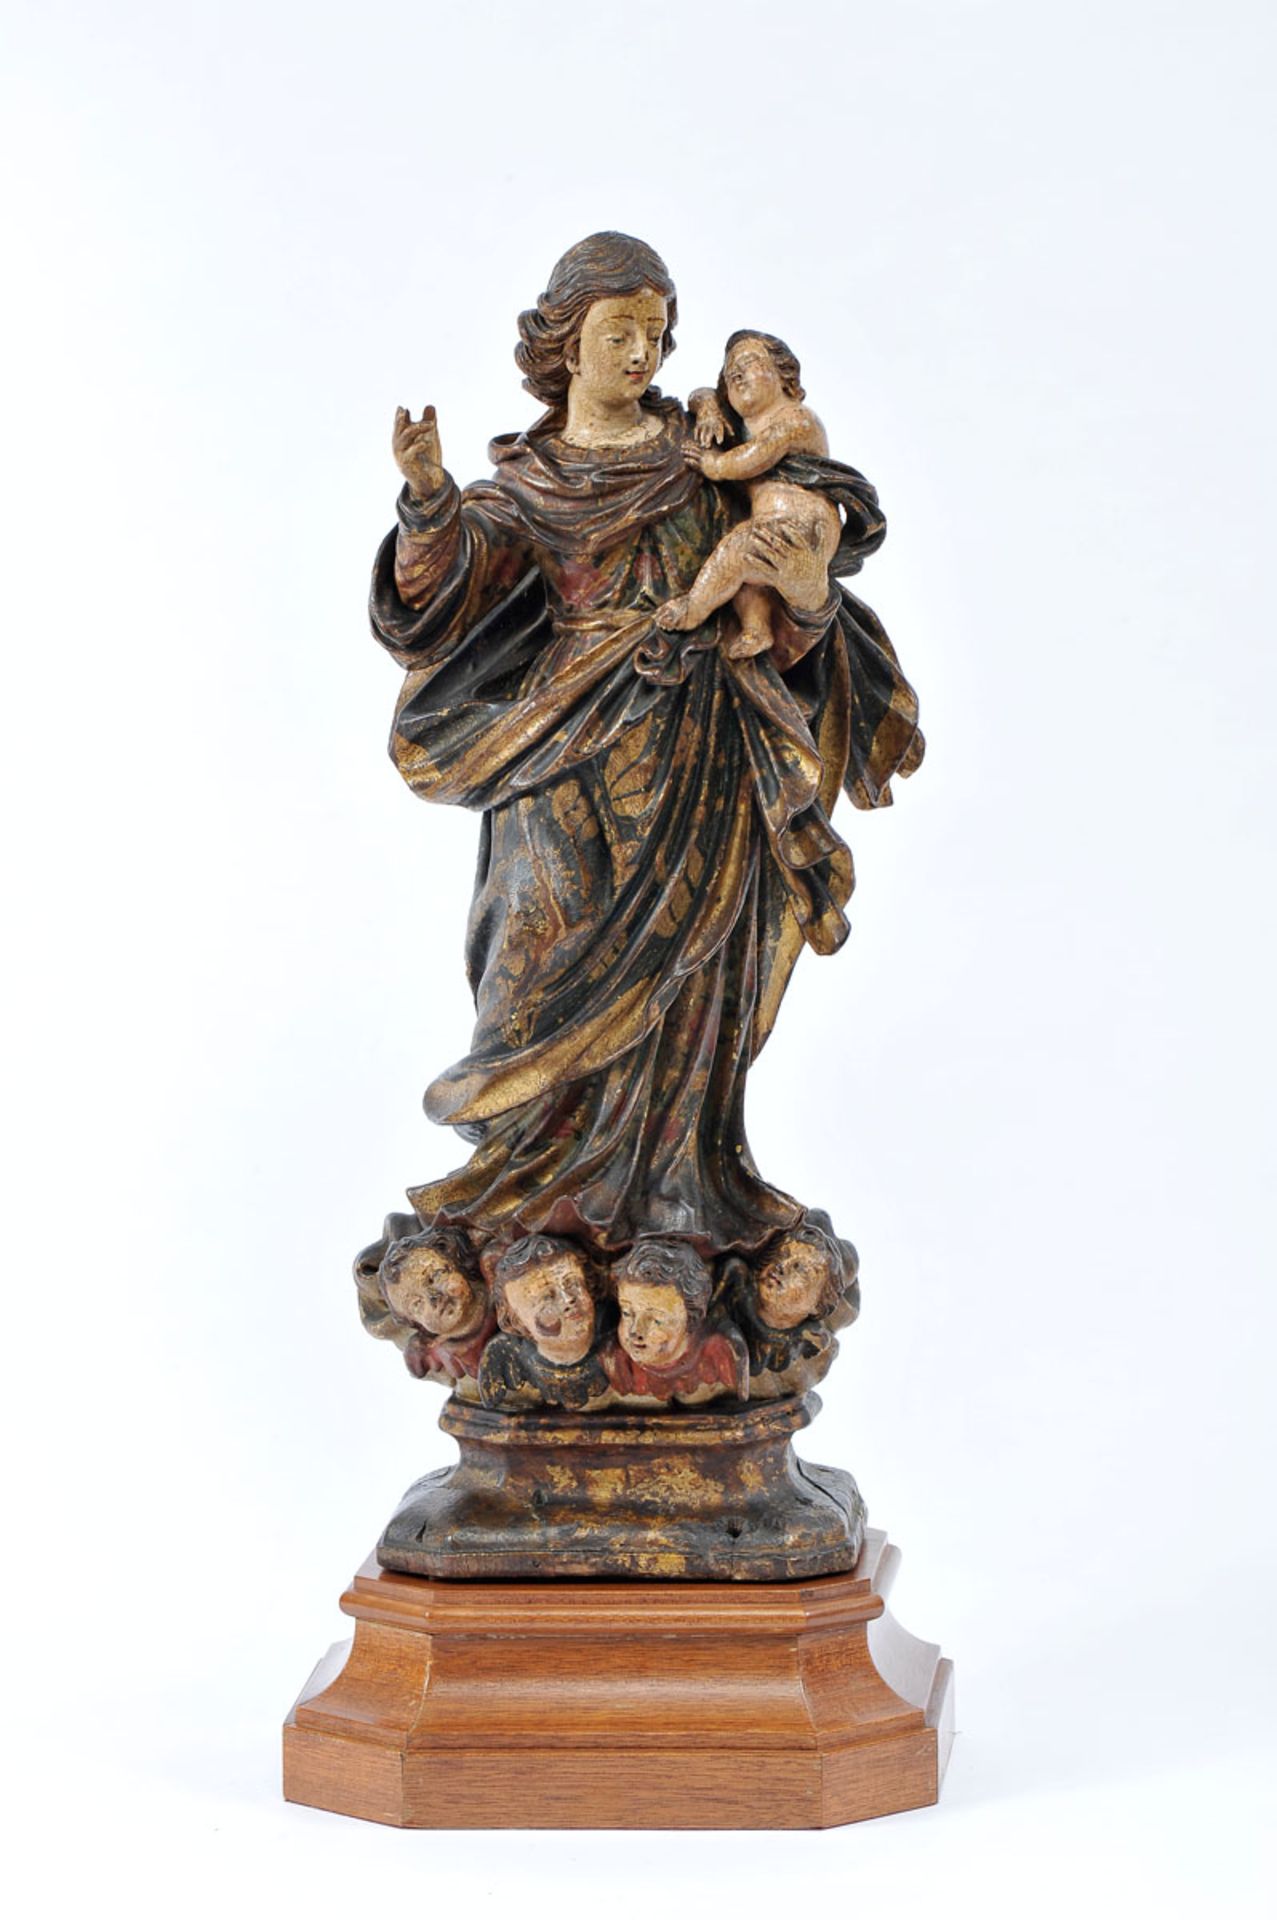 Our Lady with The Child Jesus, gilt and polychrome wooden sculpture, Portuguese, 18th C.,